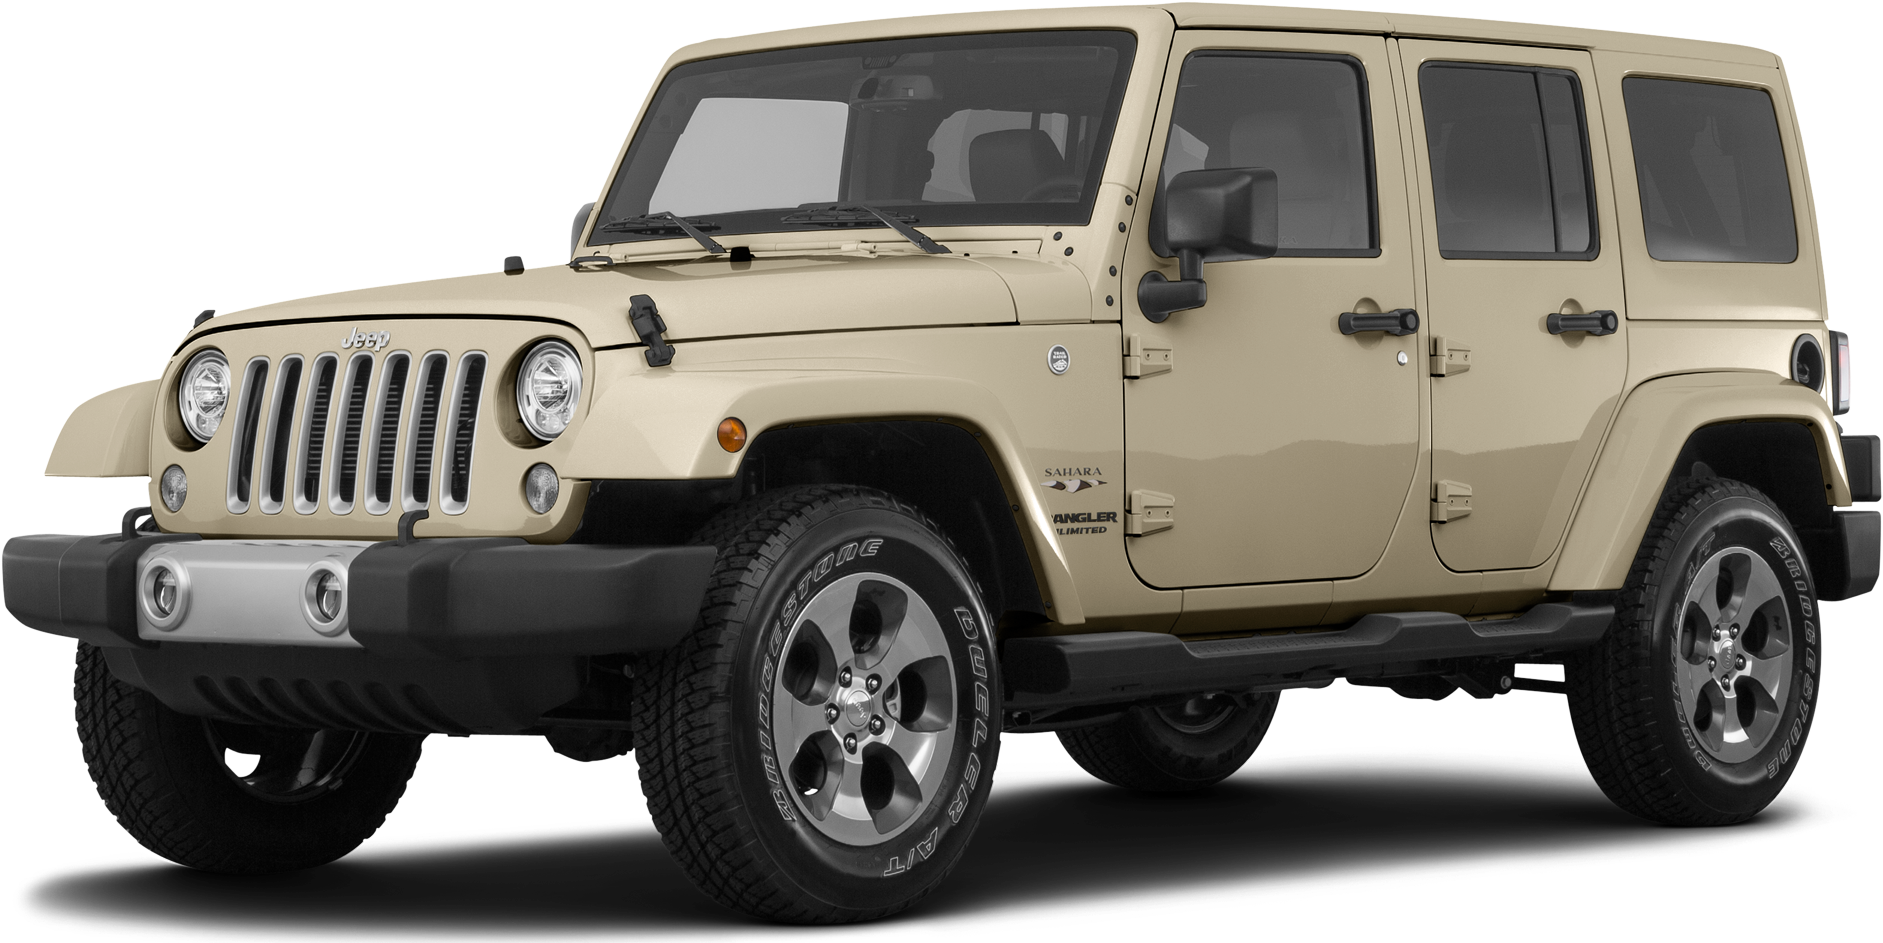 2018 Jeep Wrangler Unlimited Specs and Features | Kelley Blue Book